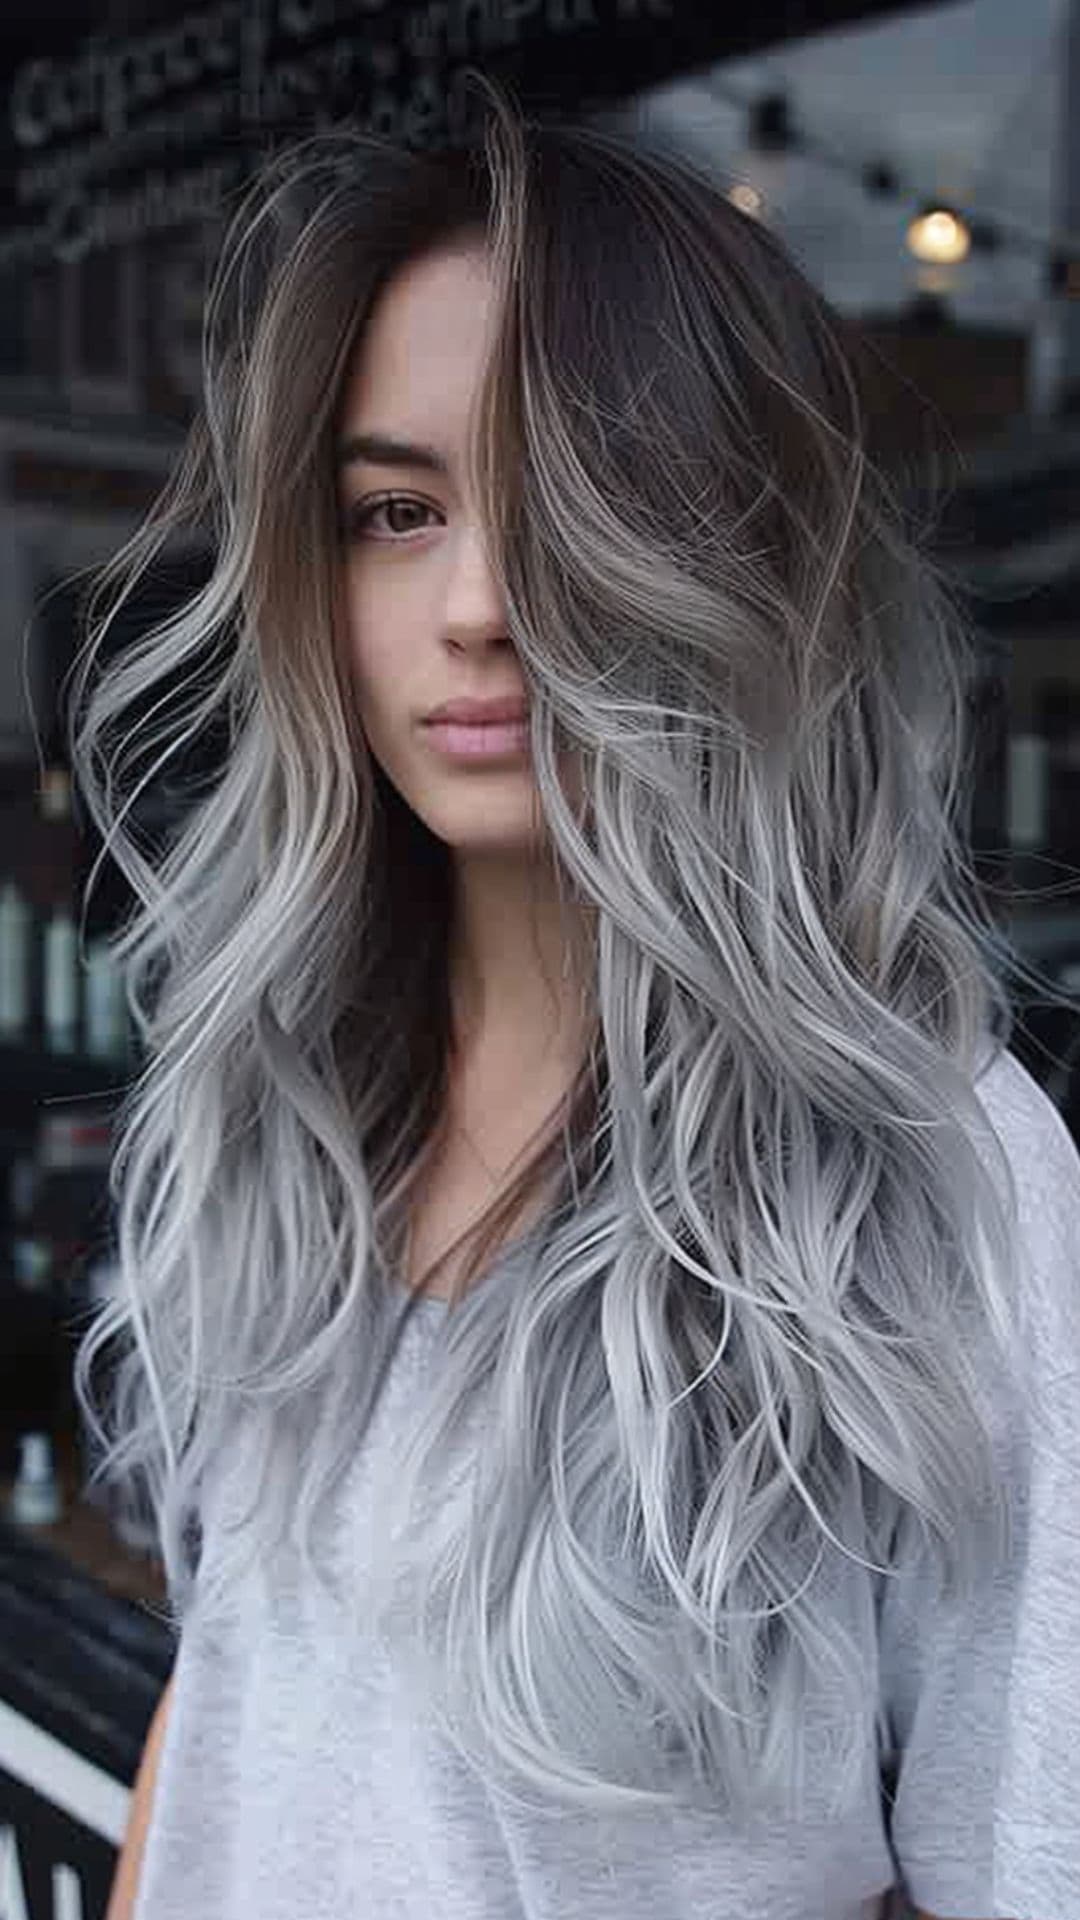 A woman modelling a frosted gray ombre hair.